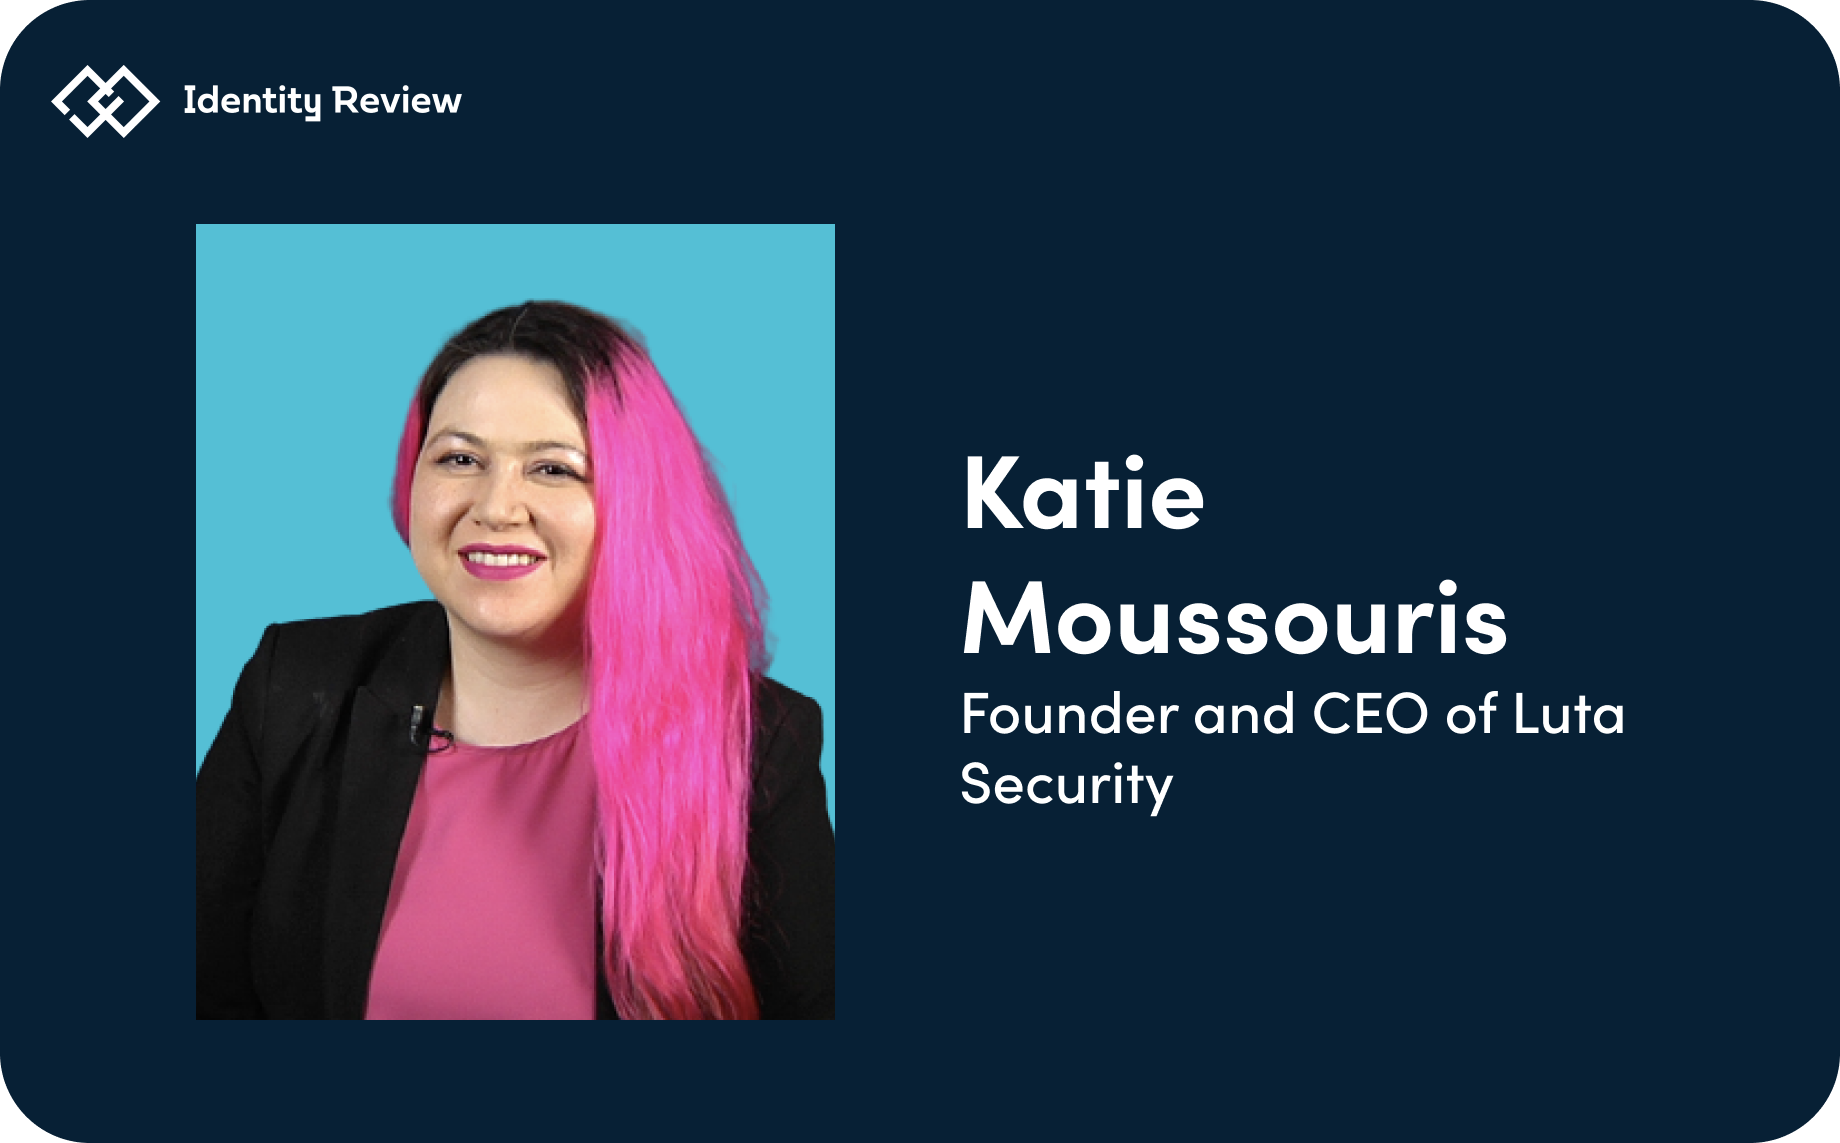 2. Katie Moussouris, founder and CEO of Luta Security